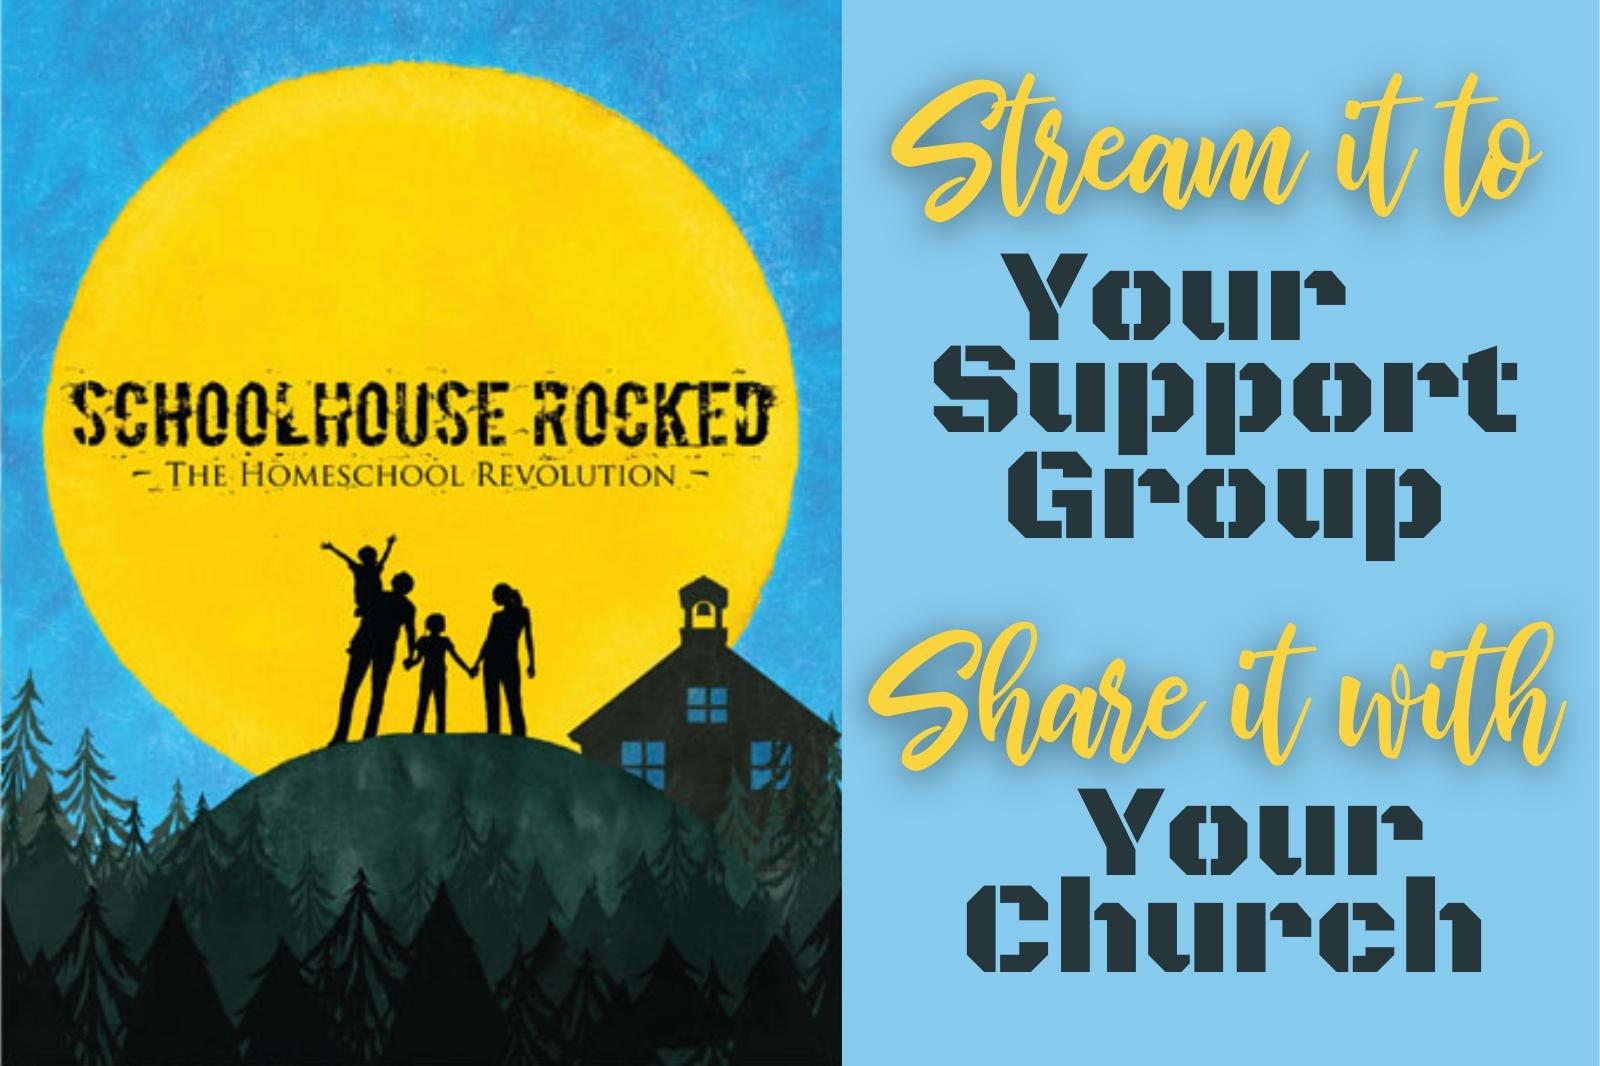 Support Homeschool Iowa with Schoolhouse Rocked: Bring it to your support group or church